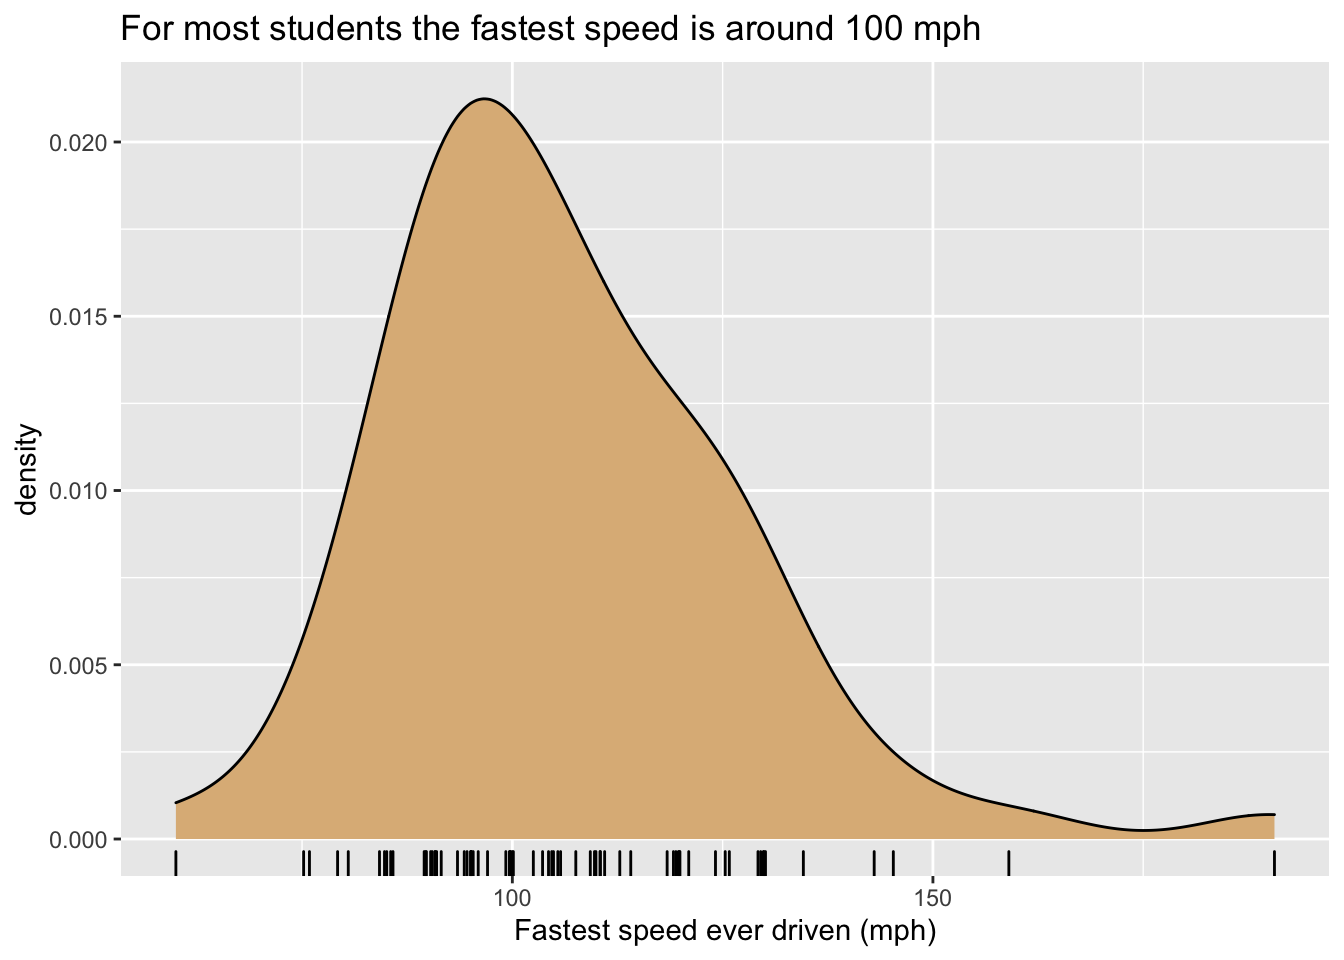 Density plot of the fastest speed ever driven.